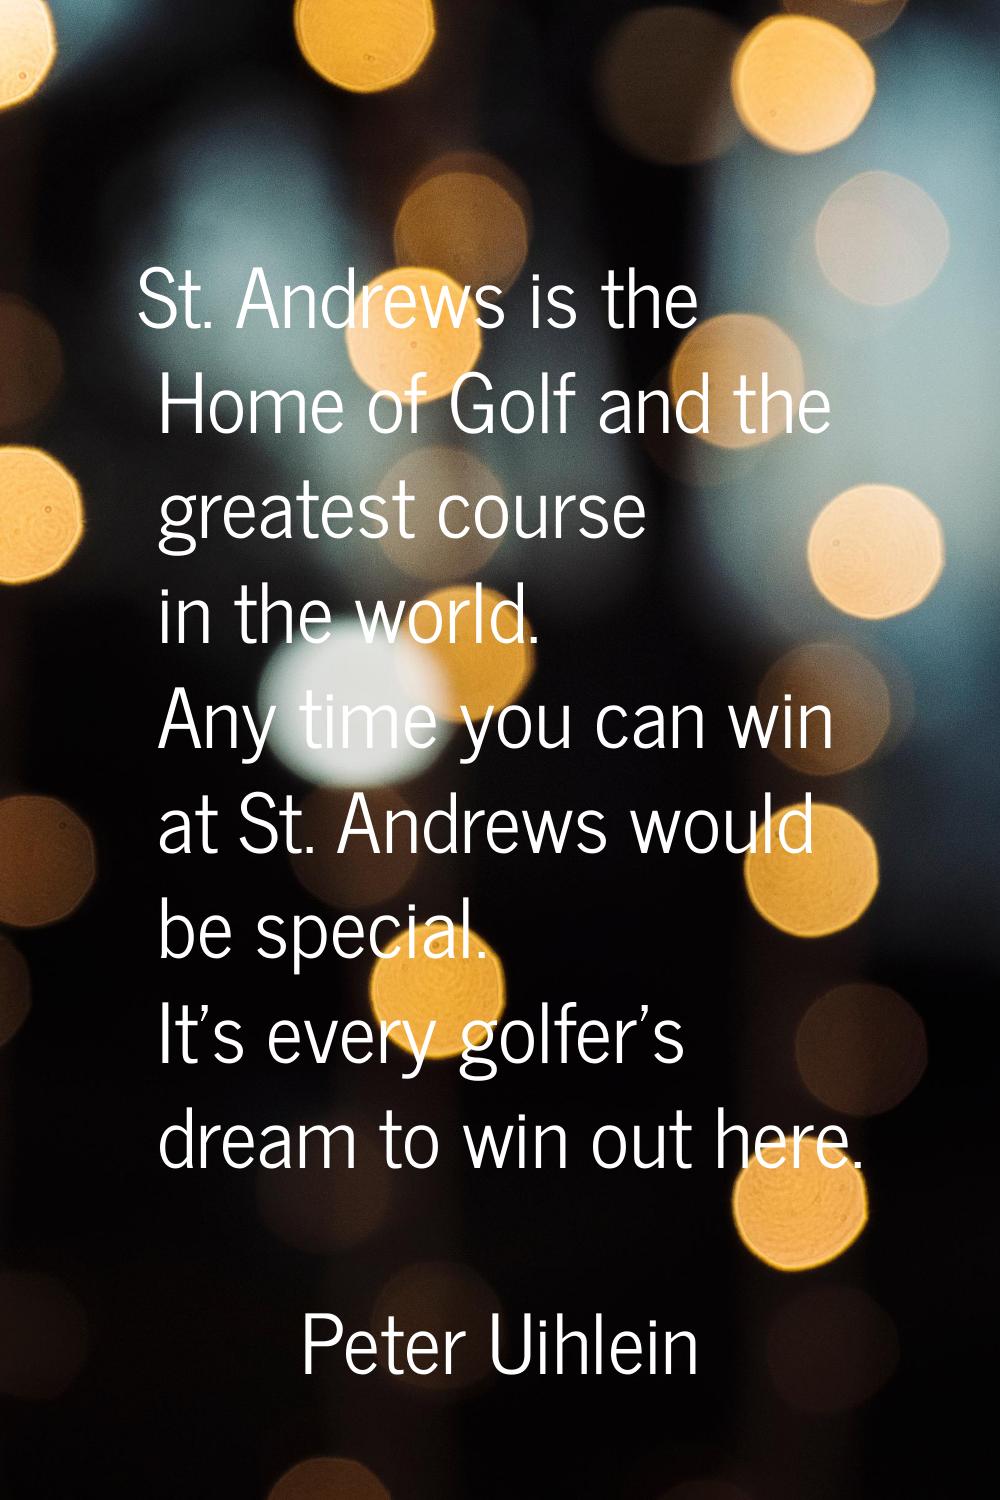 St. Andrews is the Home of Golf and the greatest course in the world. Any time you can win at St. A